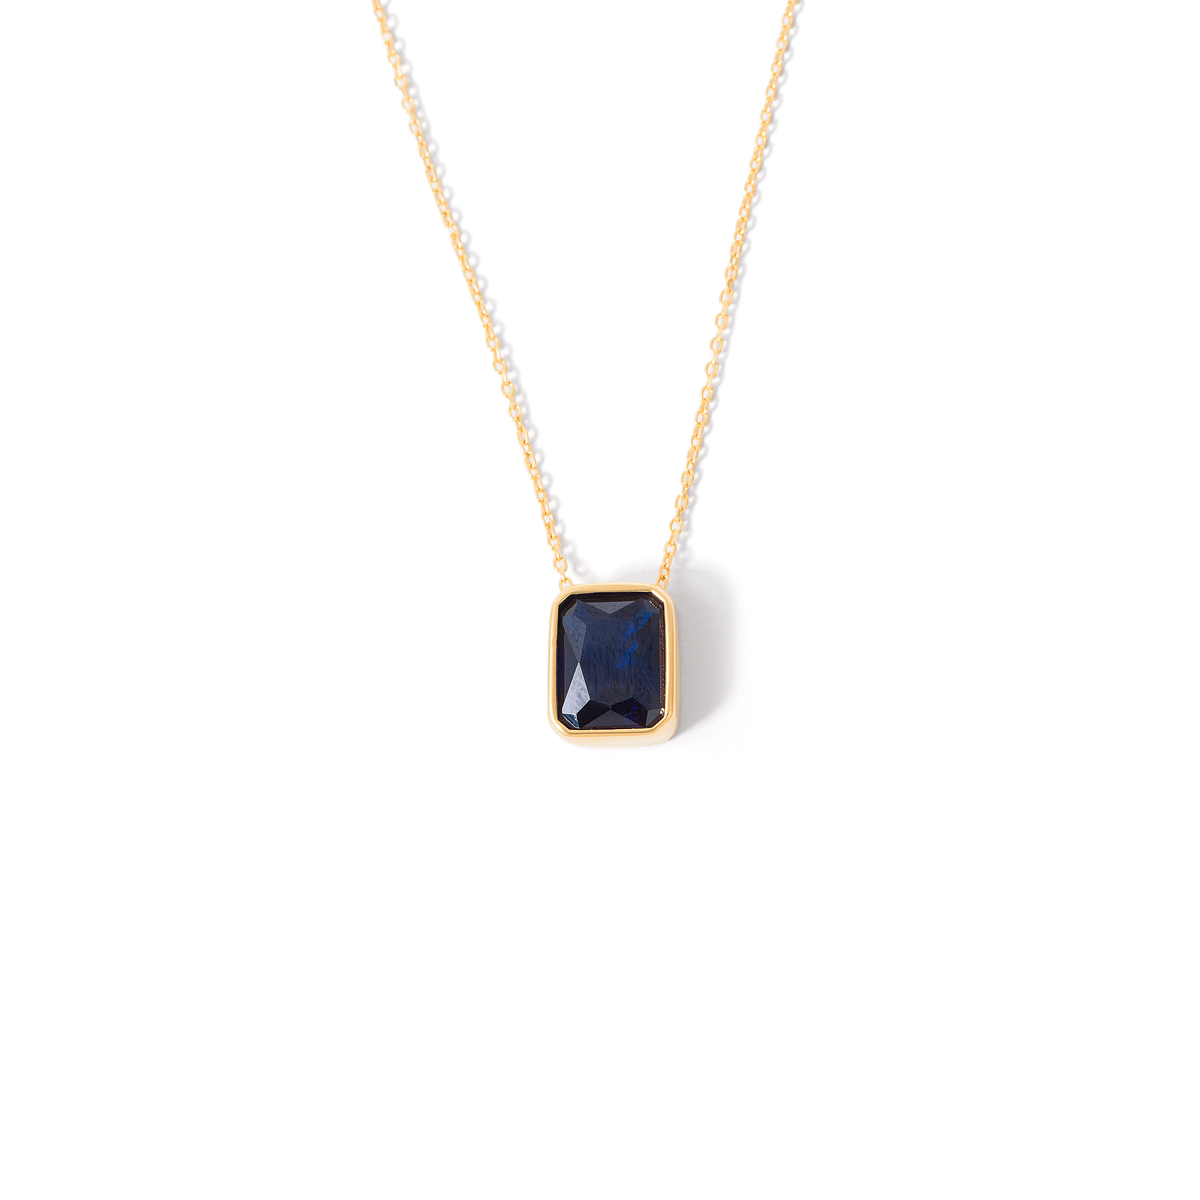 Gold necklace with a single gem g